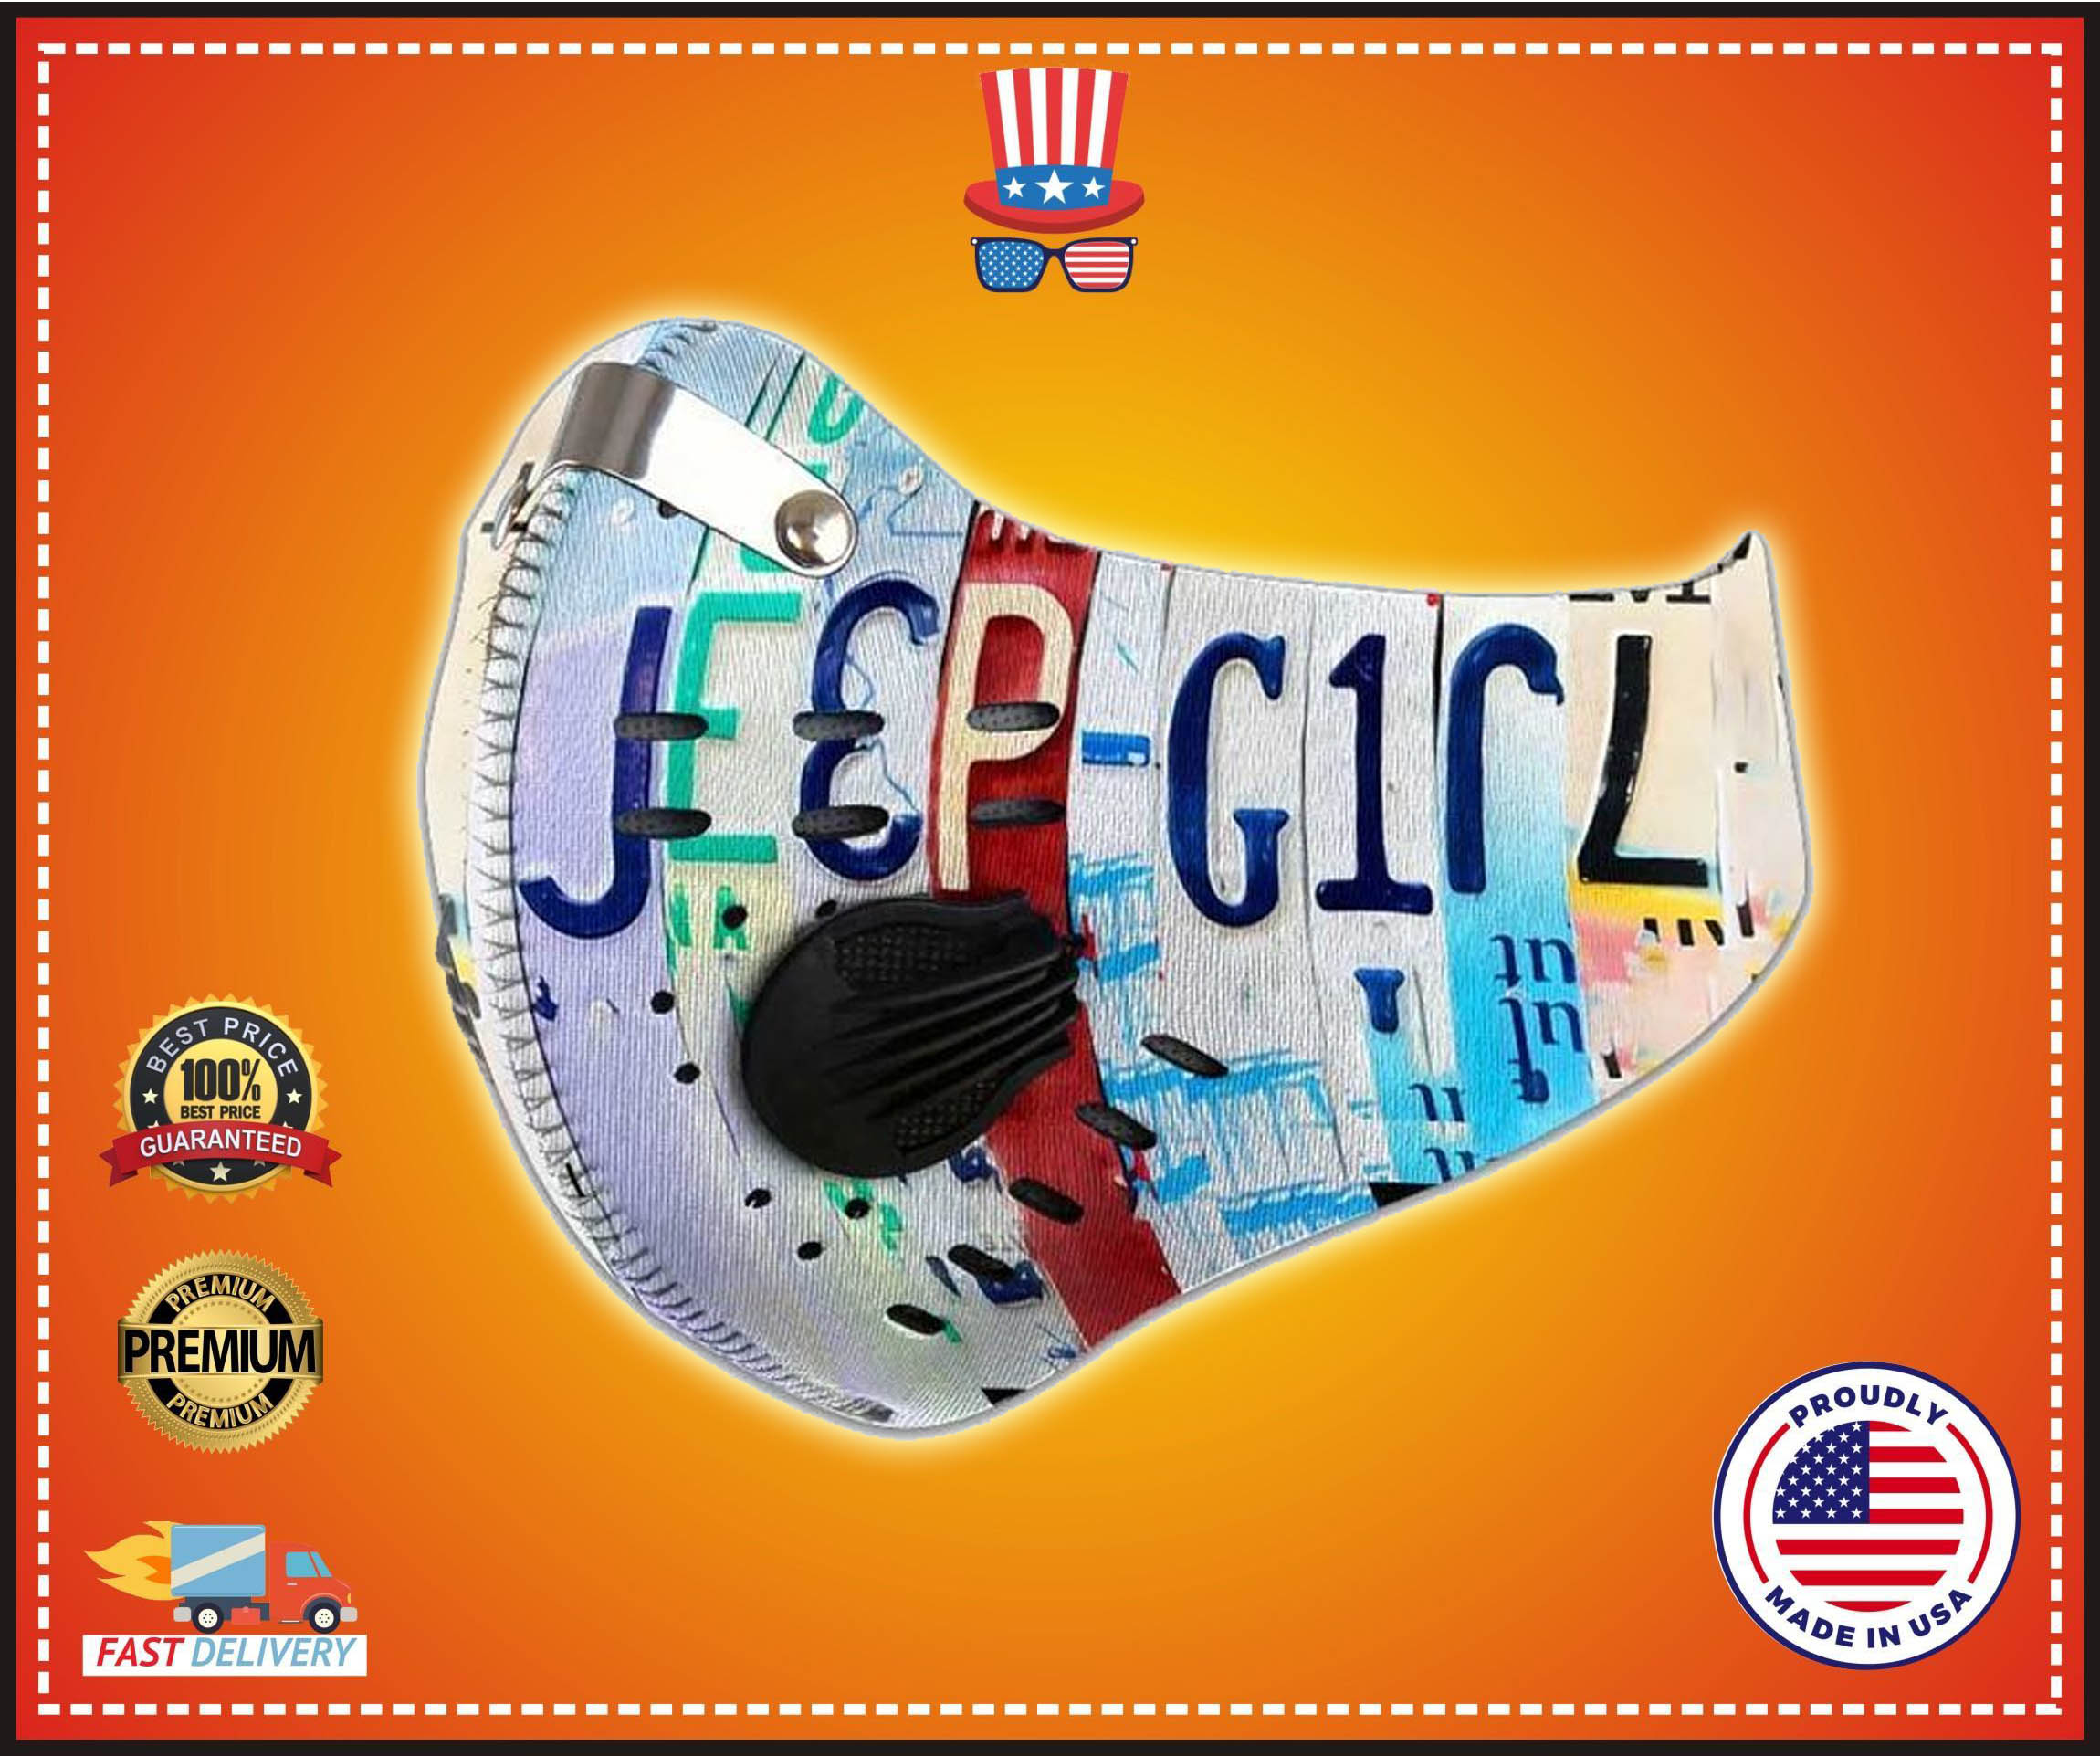 Jeep girl filter face mask